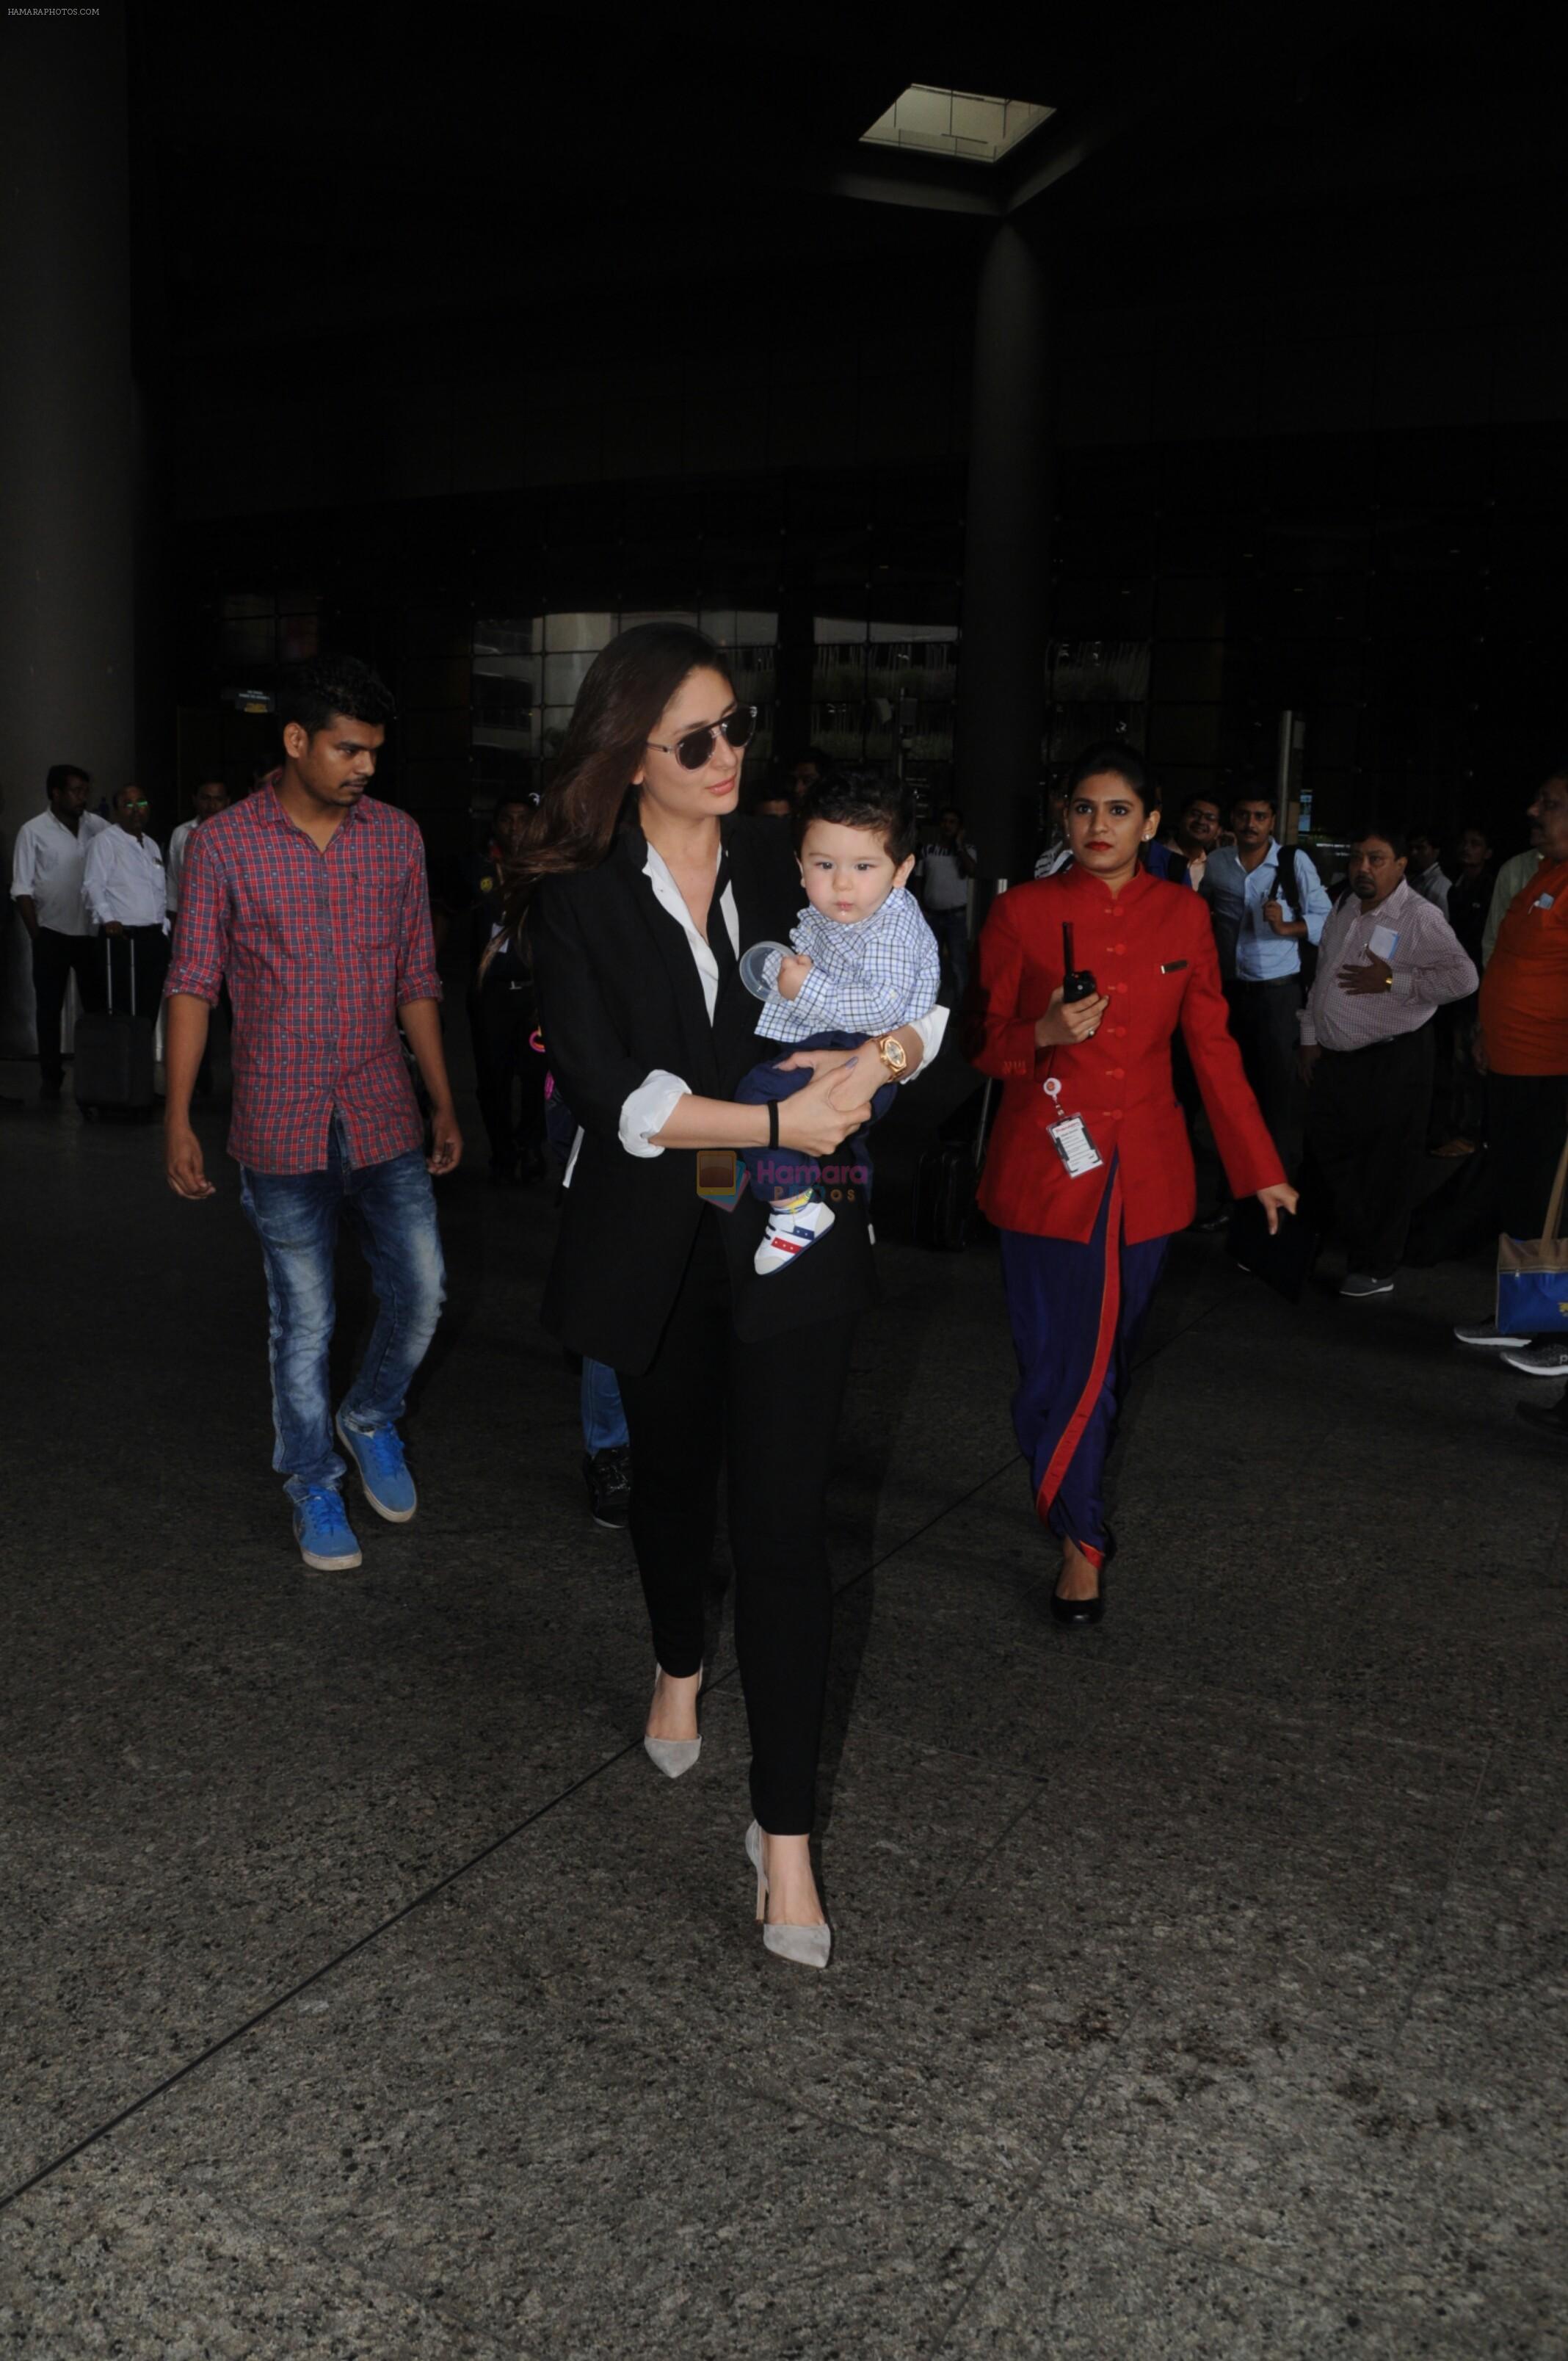 Kareena Kapoor & Her Son Taimur Ali Khan Spotted At Airport on 8th Sept 2017